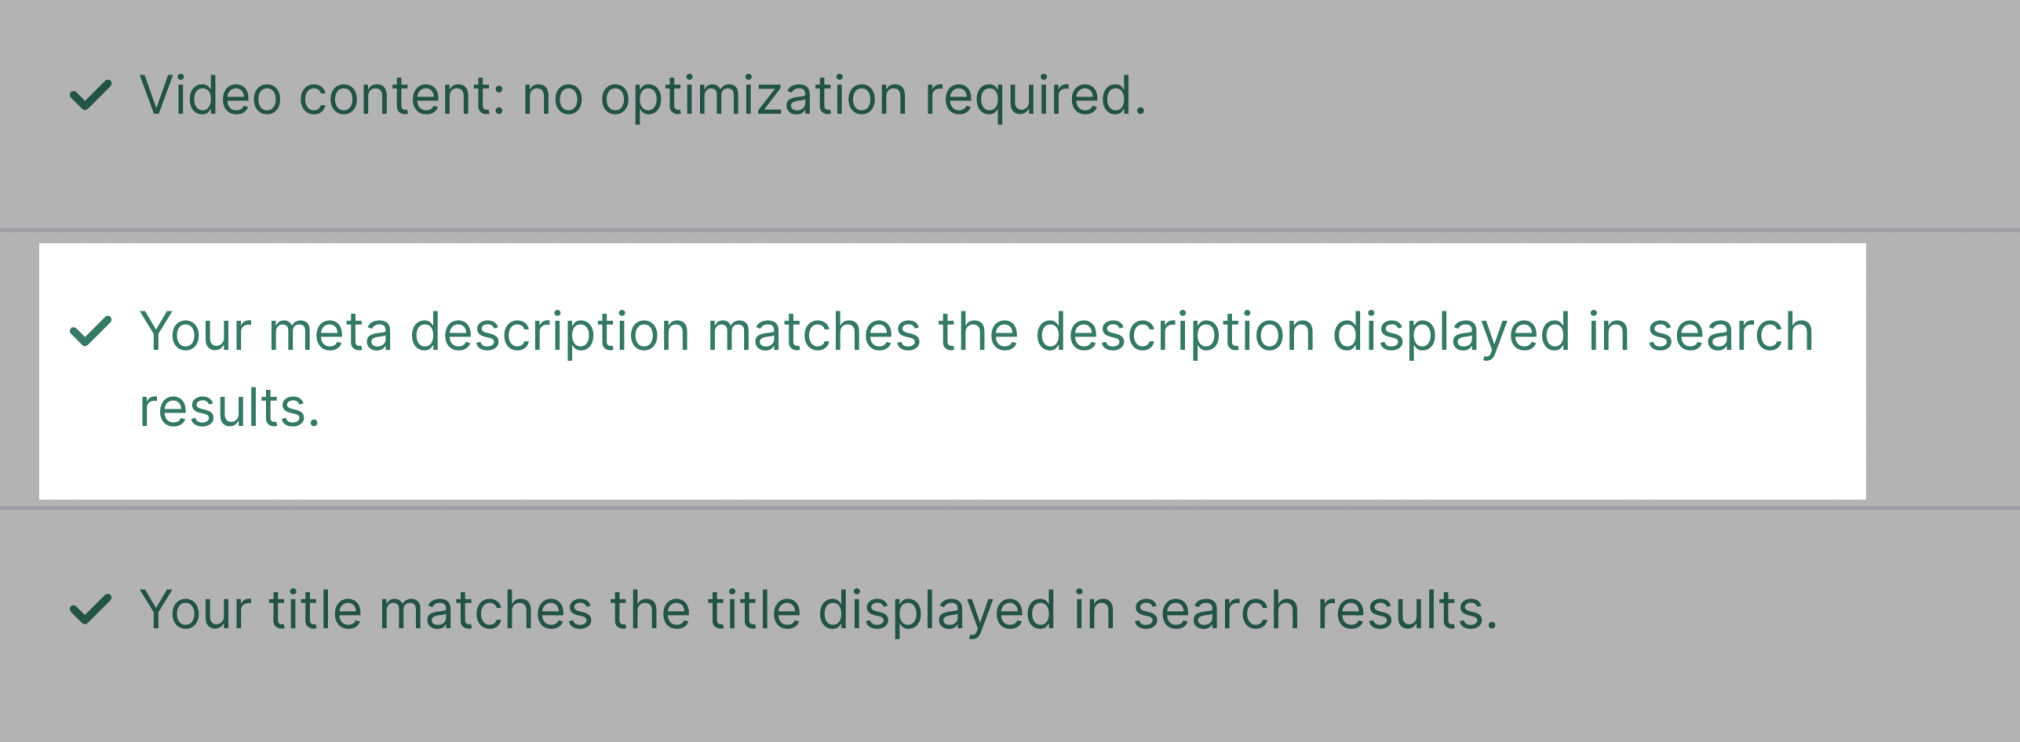 your meta description matches the description displayed in search results